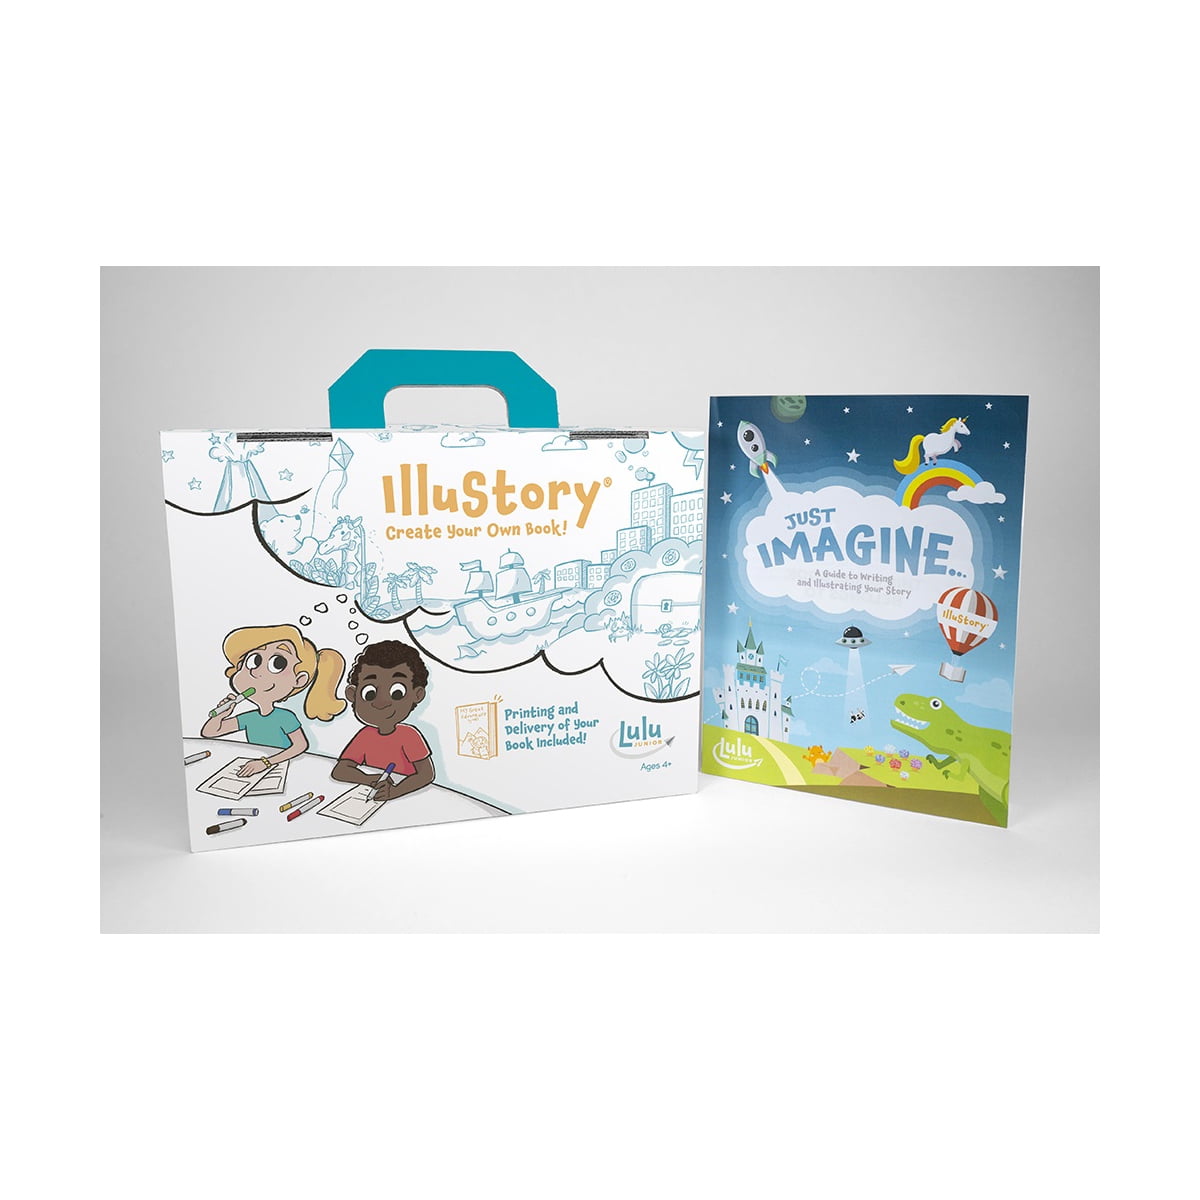 ILLUSTORY Write and Illustrate Your Own Book! New / Sealed. By Chimeric  Inc.